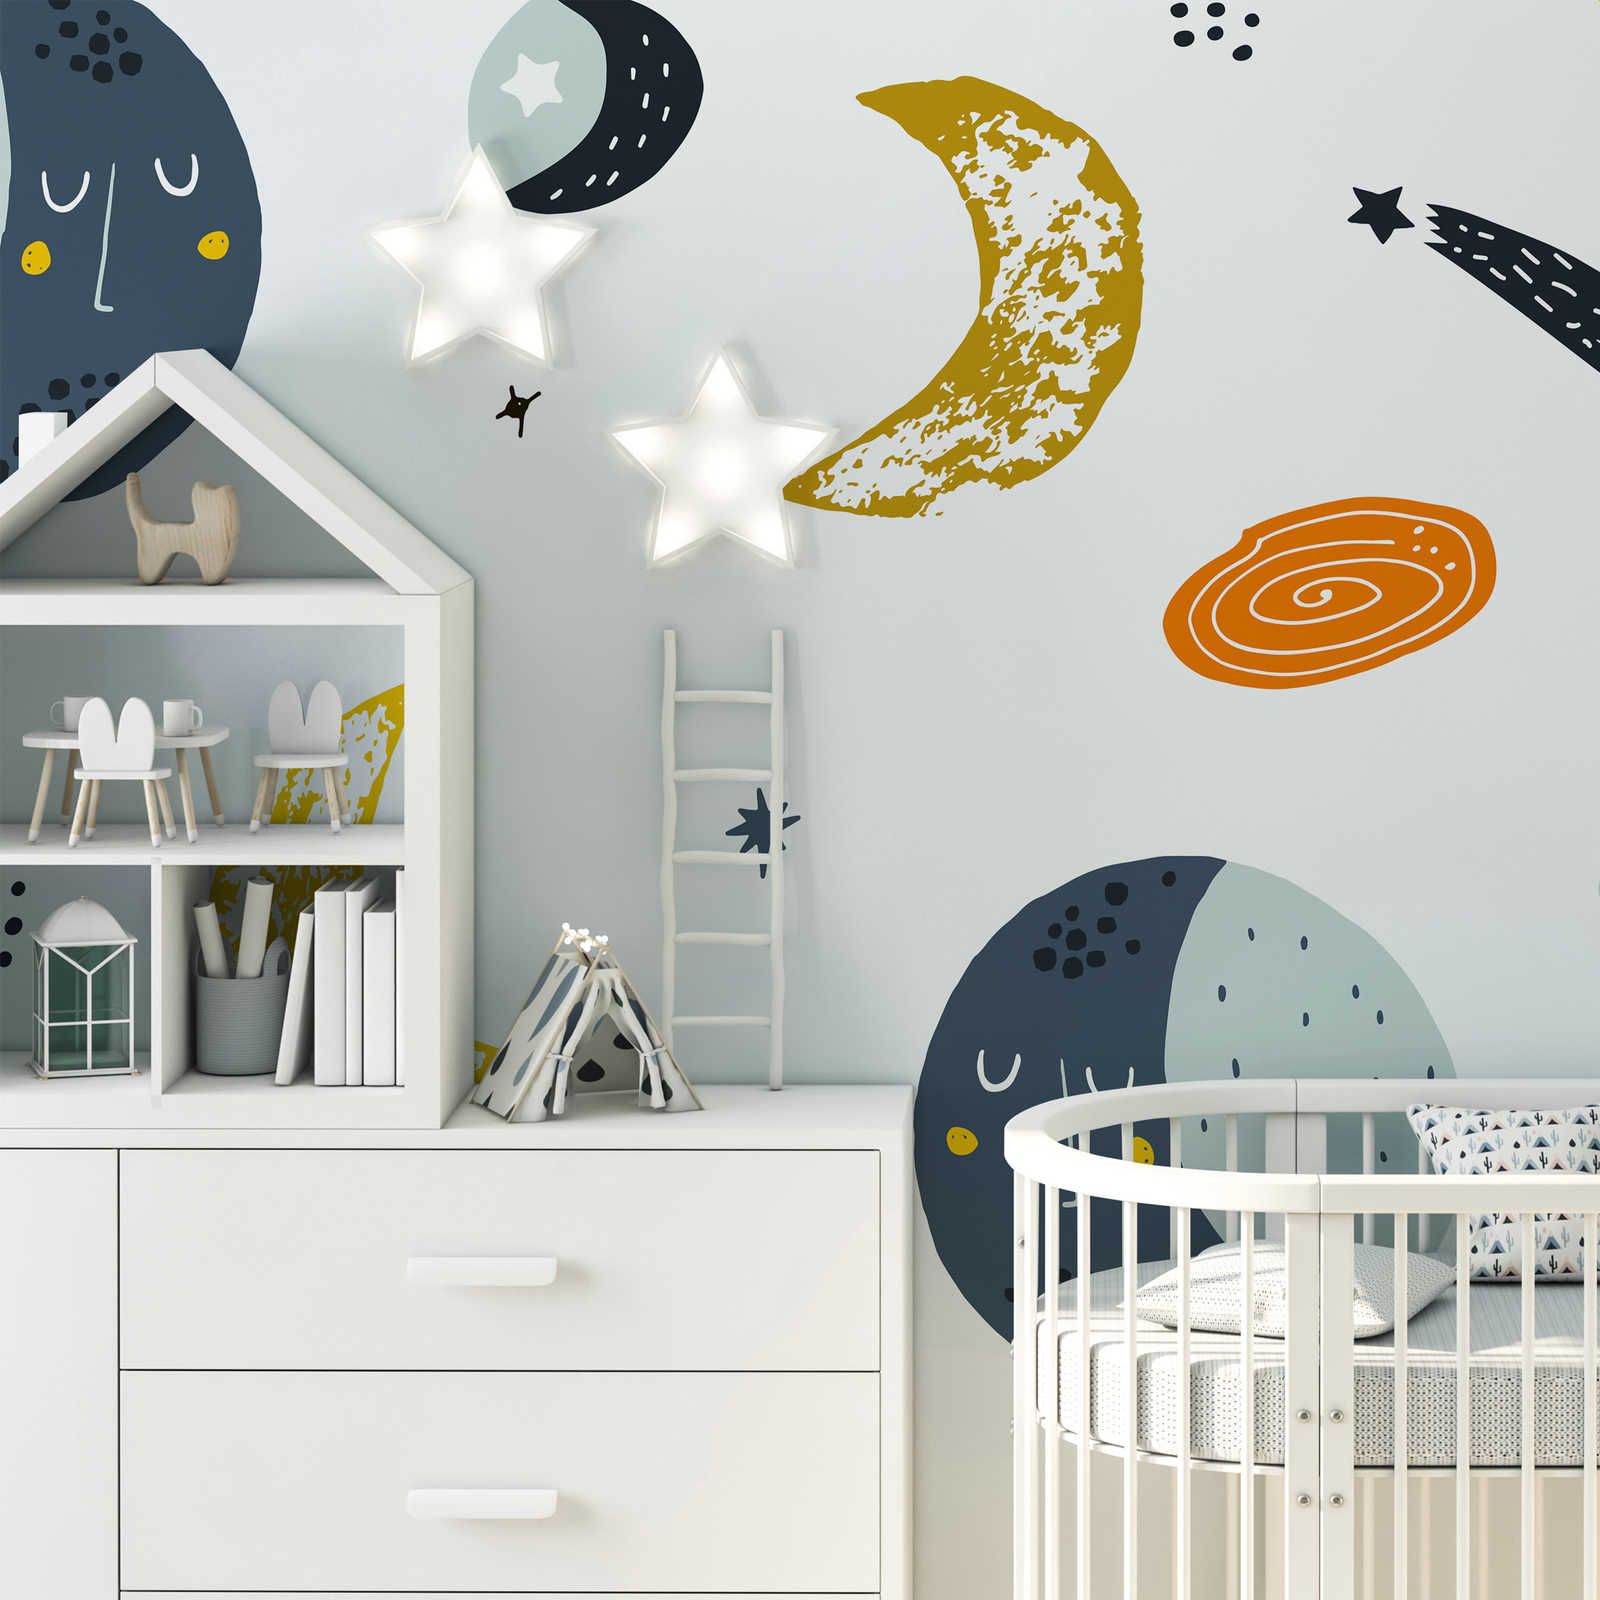 Photo wallpaper with moons and shooting stars - Textured non-woven
